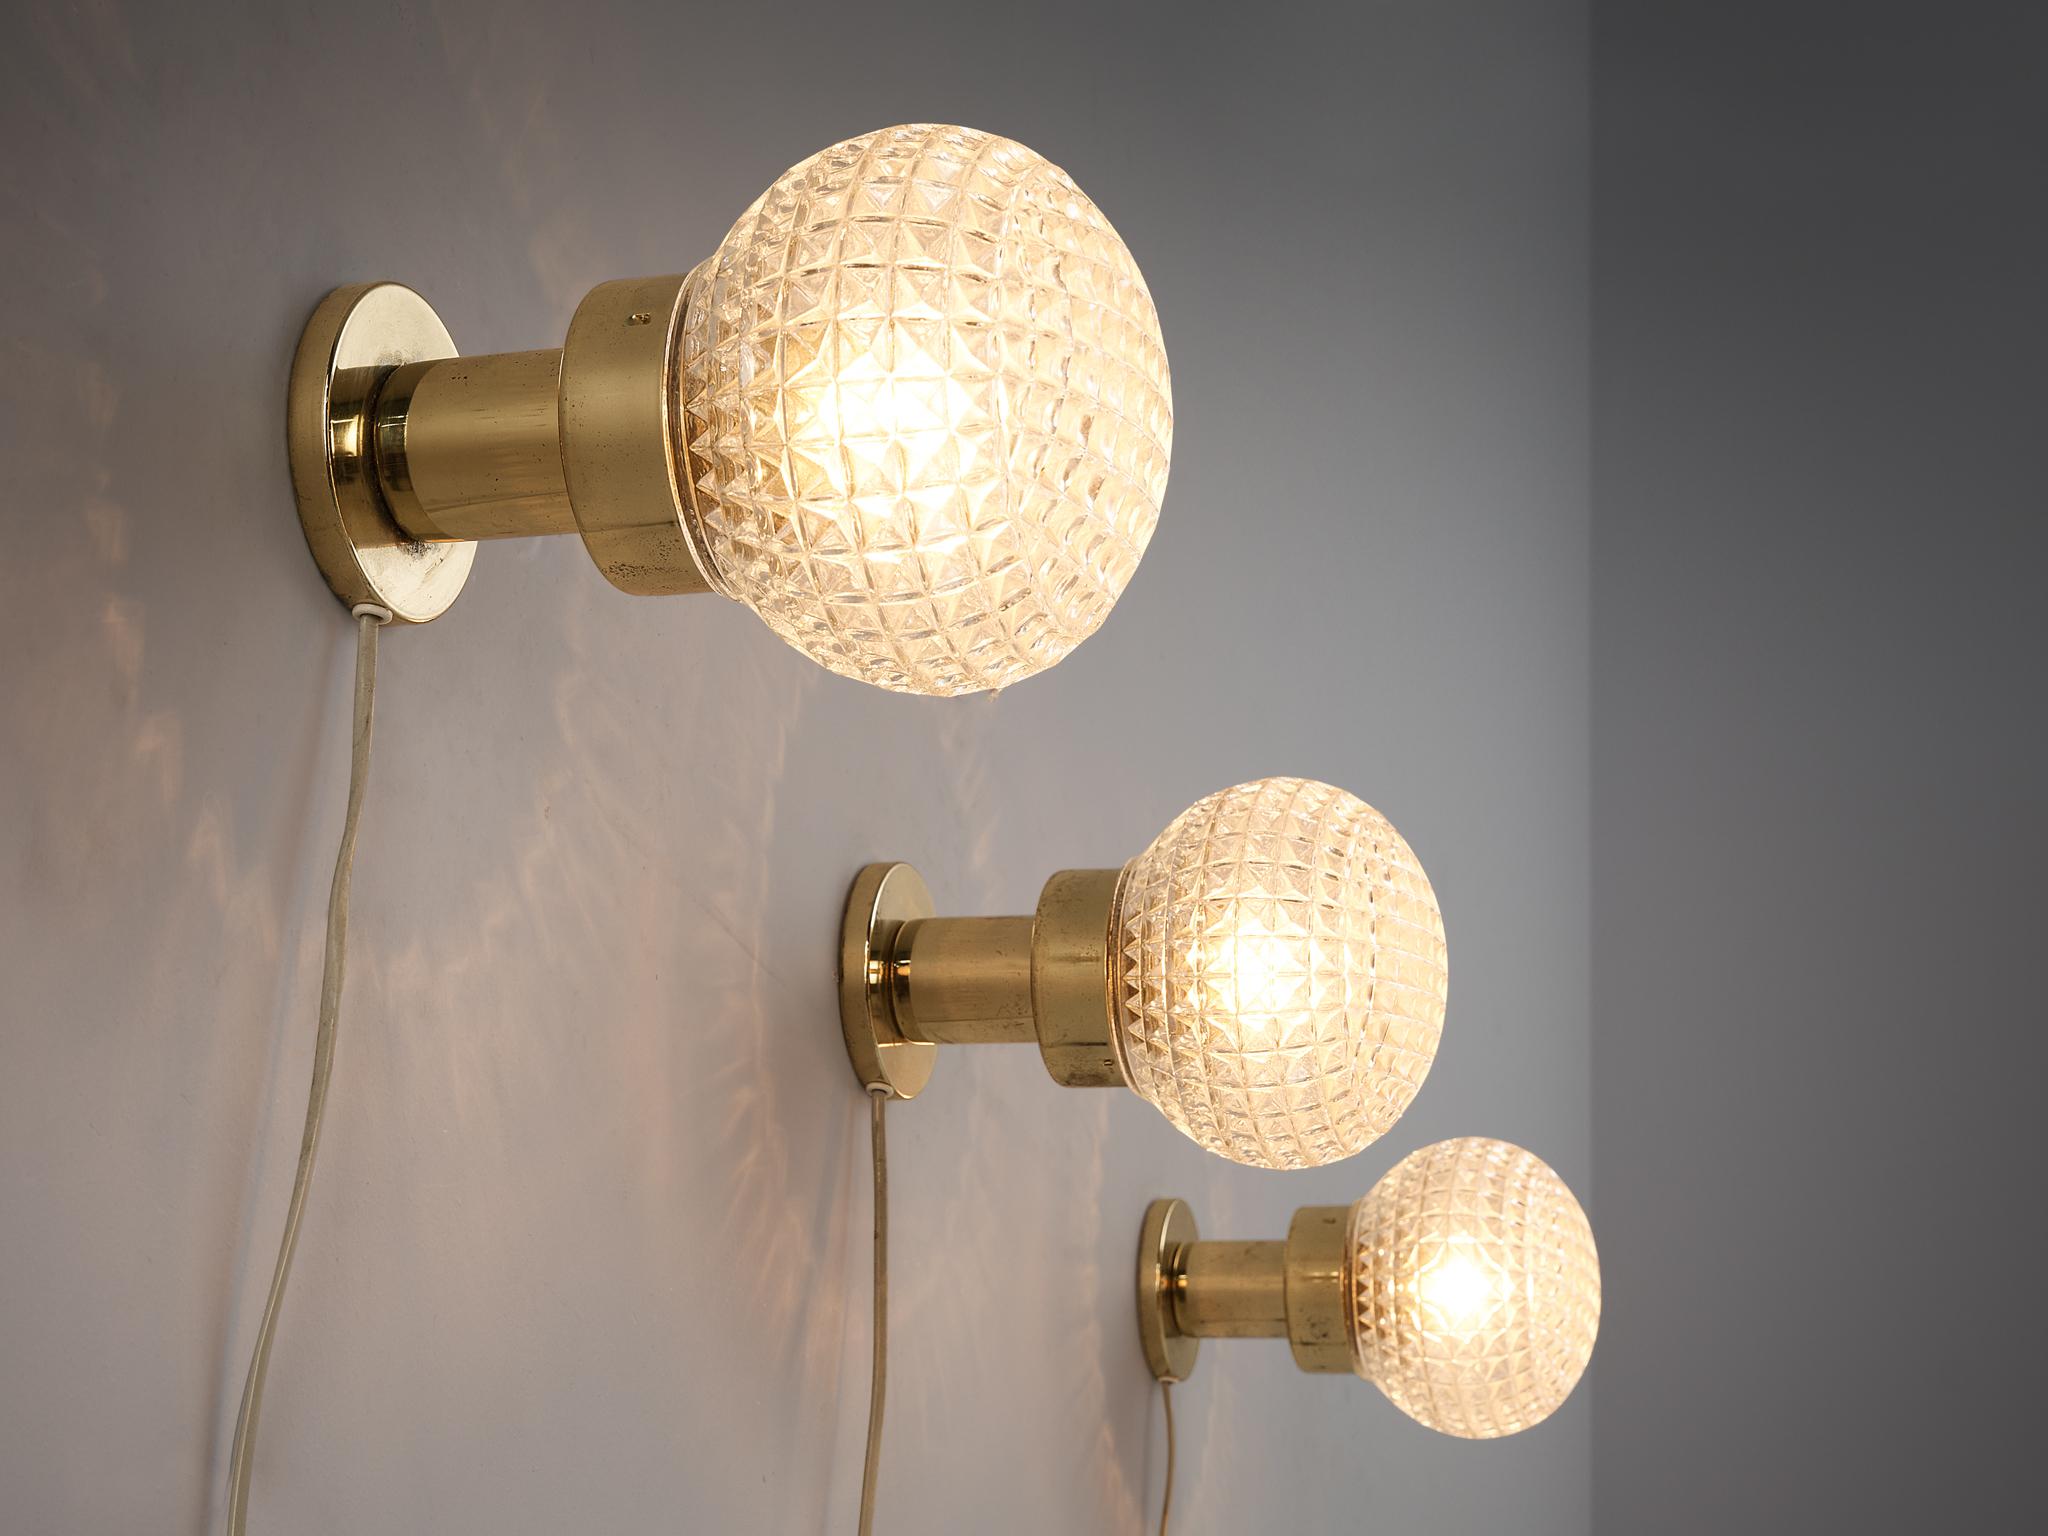 Set of three wall lights, glass, brass, metal, Europe, 1960s.

These eccentric scones or table lamps are based on a round construction. The structured glass orb is supported by a round shaped pedestal. The relief surface of the glass provides a